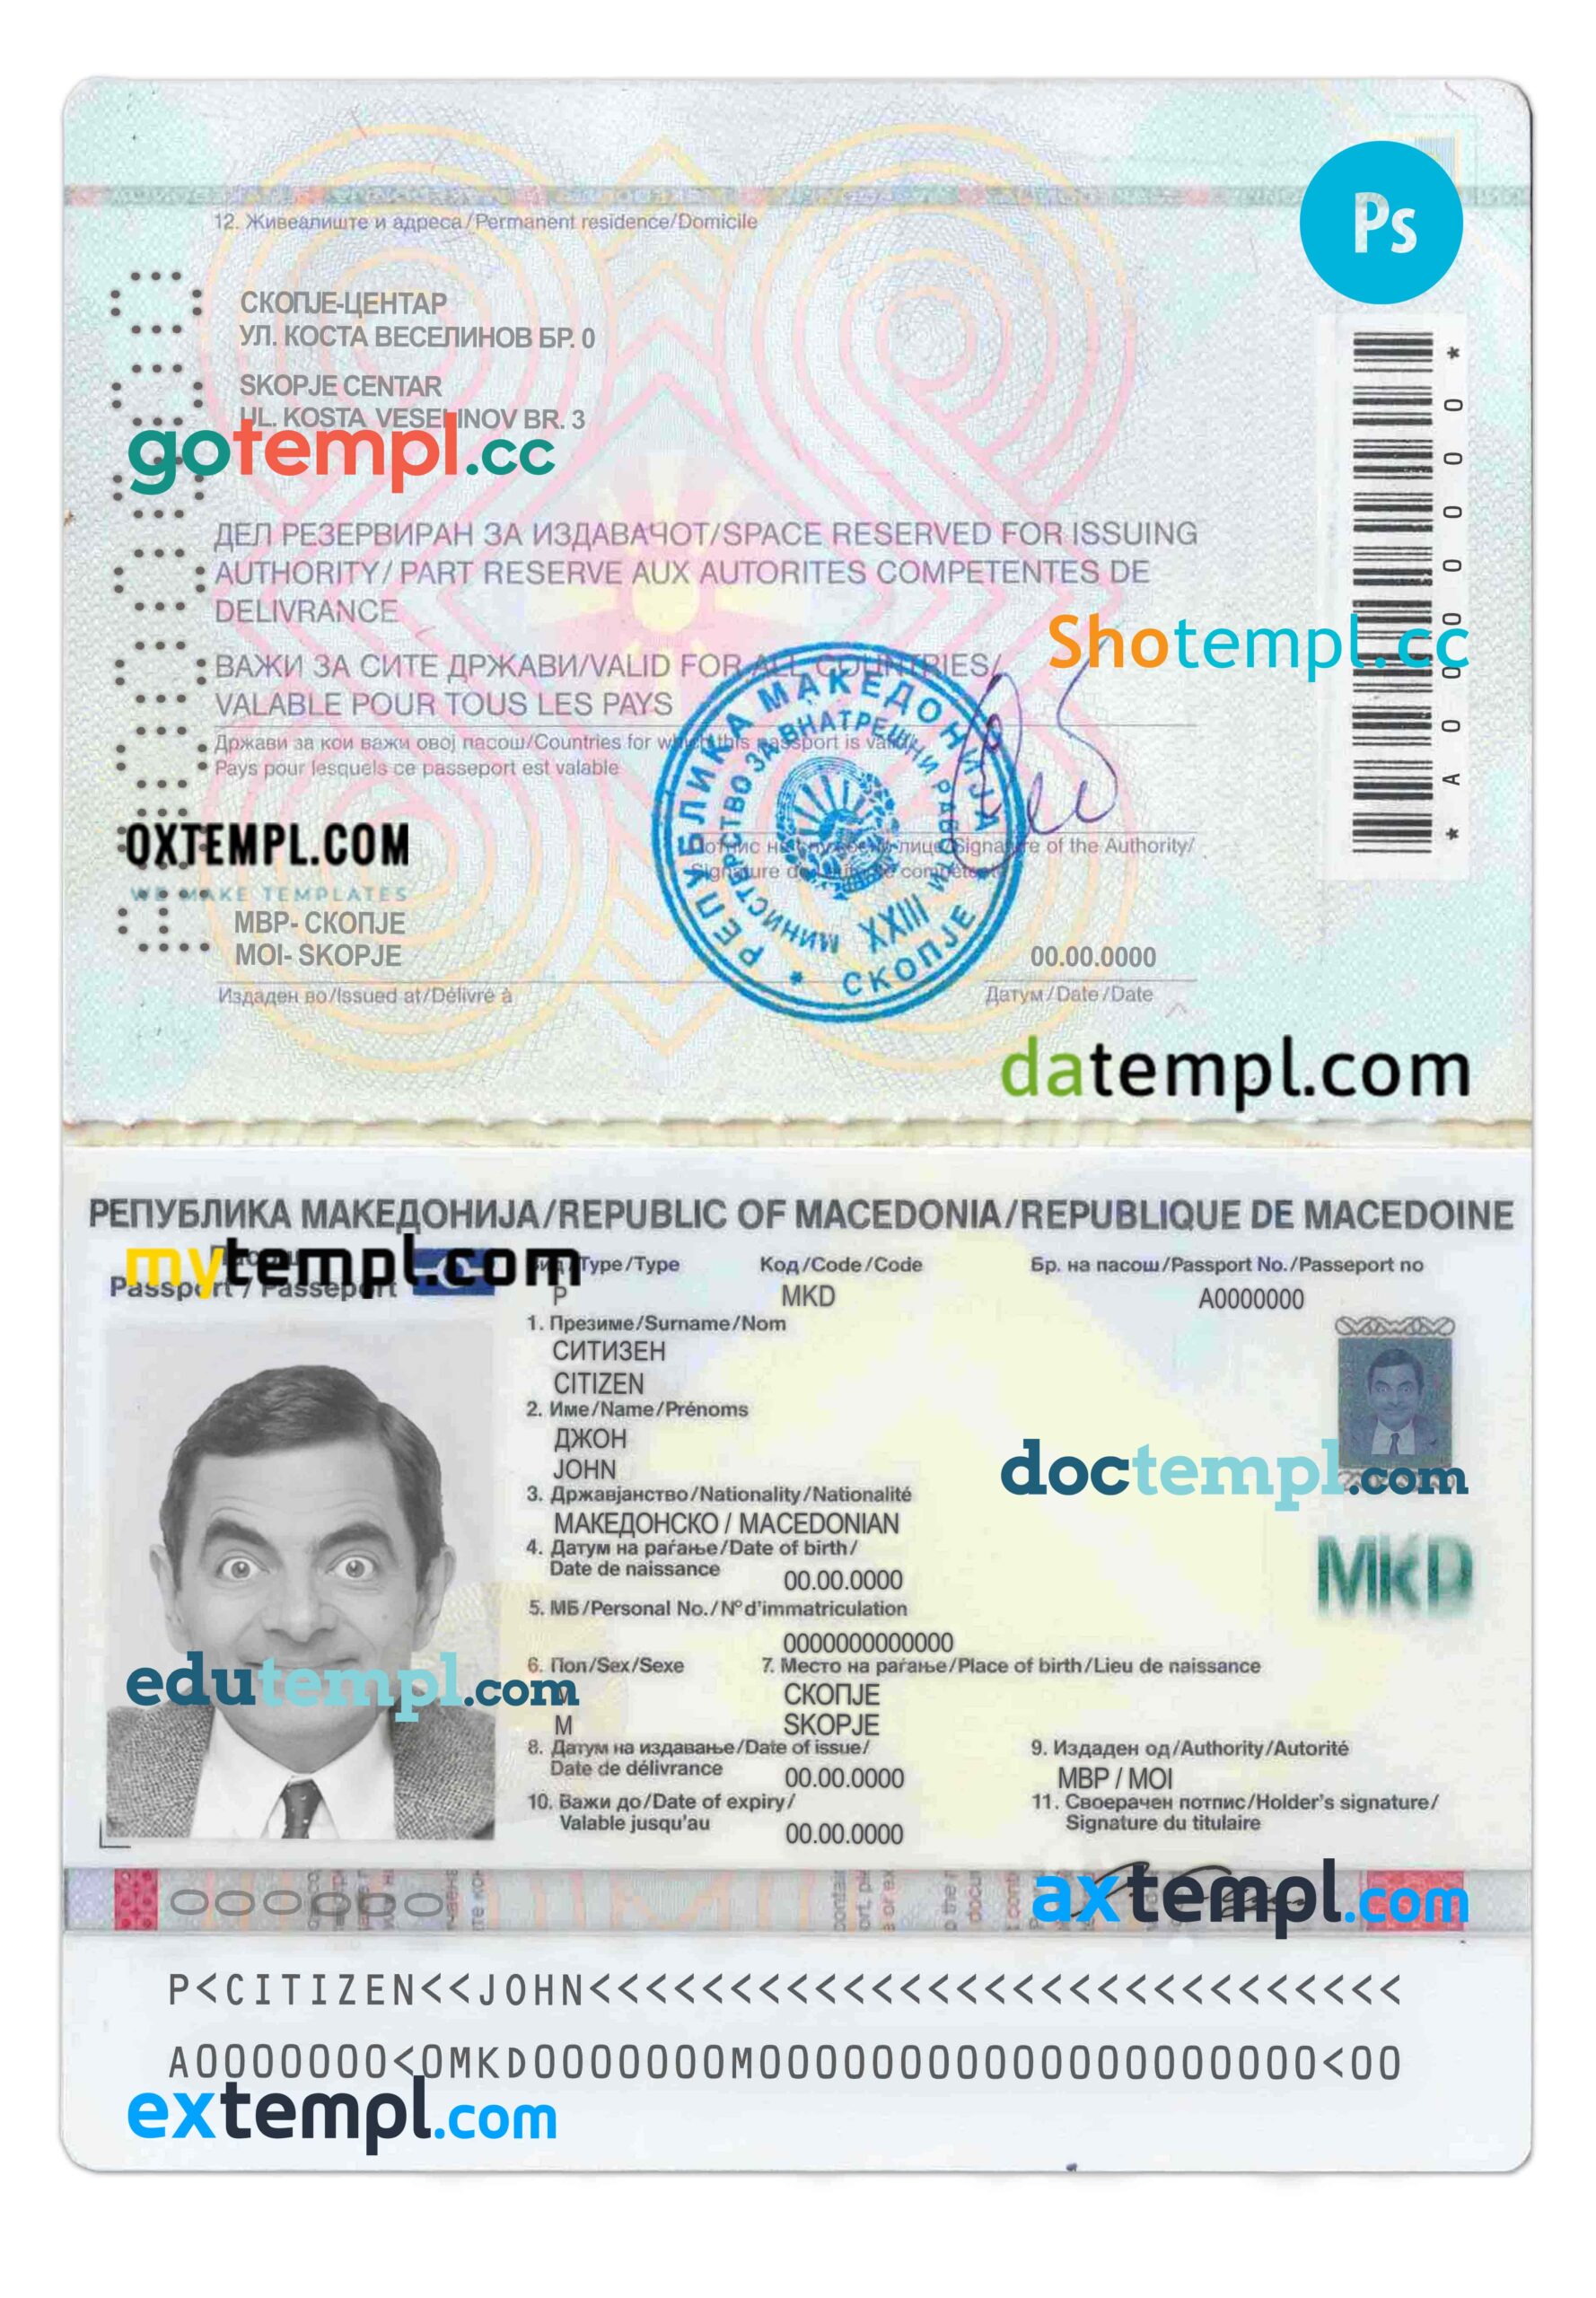 Macedonia passport PSD files, editable scan and photo-realistic look sample, 2 in 1